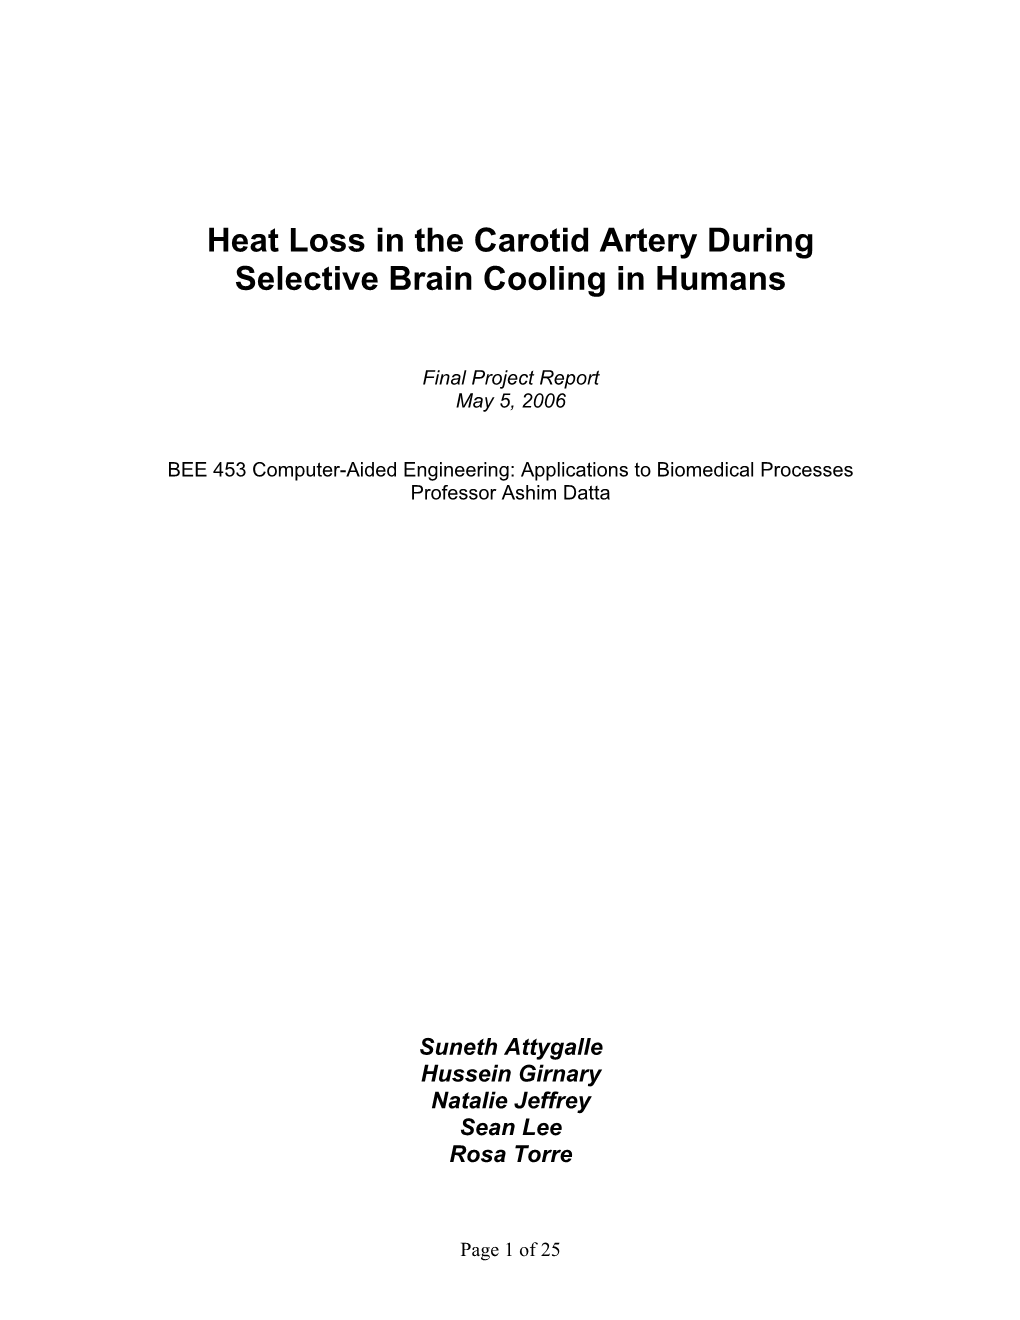 Heat Loss in the Carotid Artery During Selective Brain Cooling in Humans